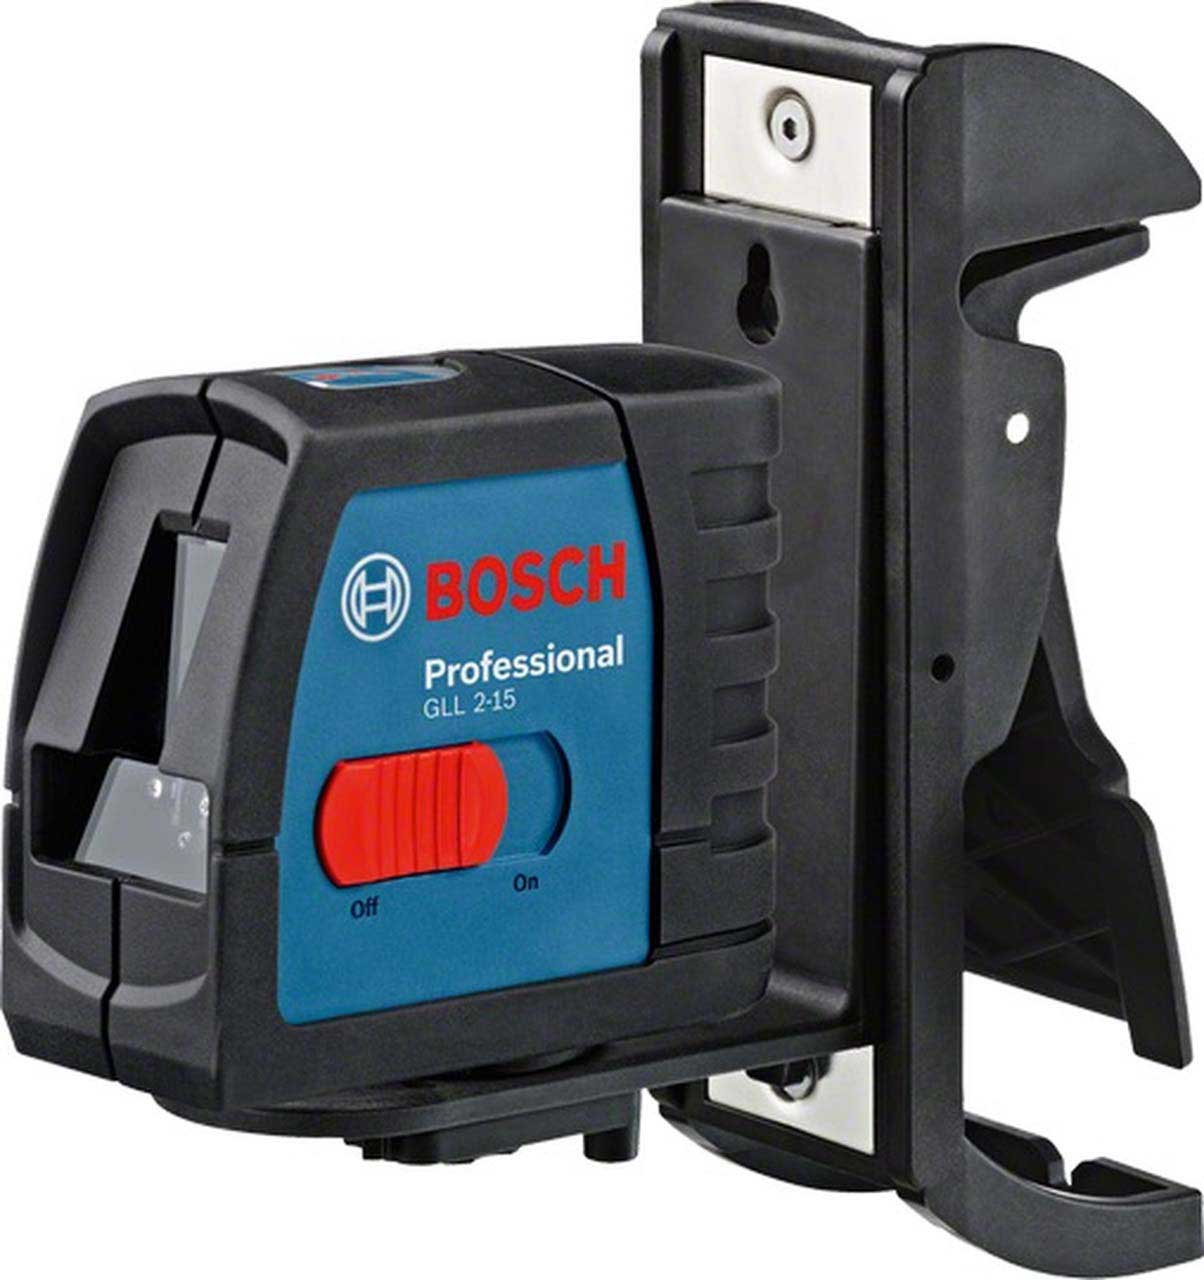 Bosch GLL 2 leveling device